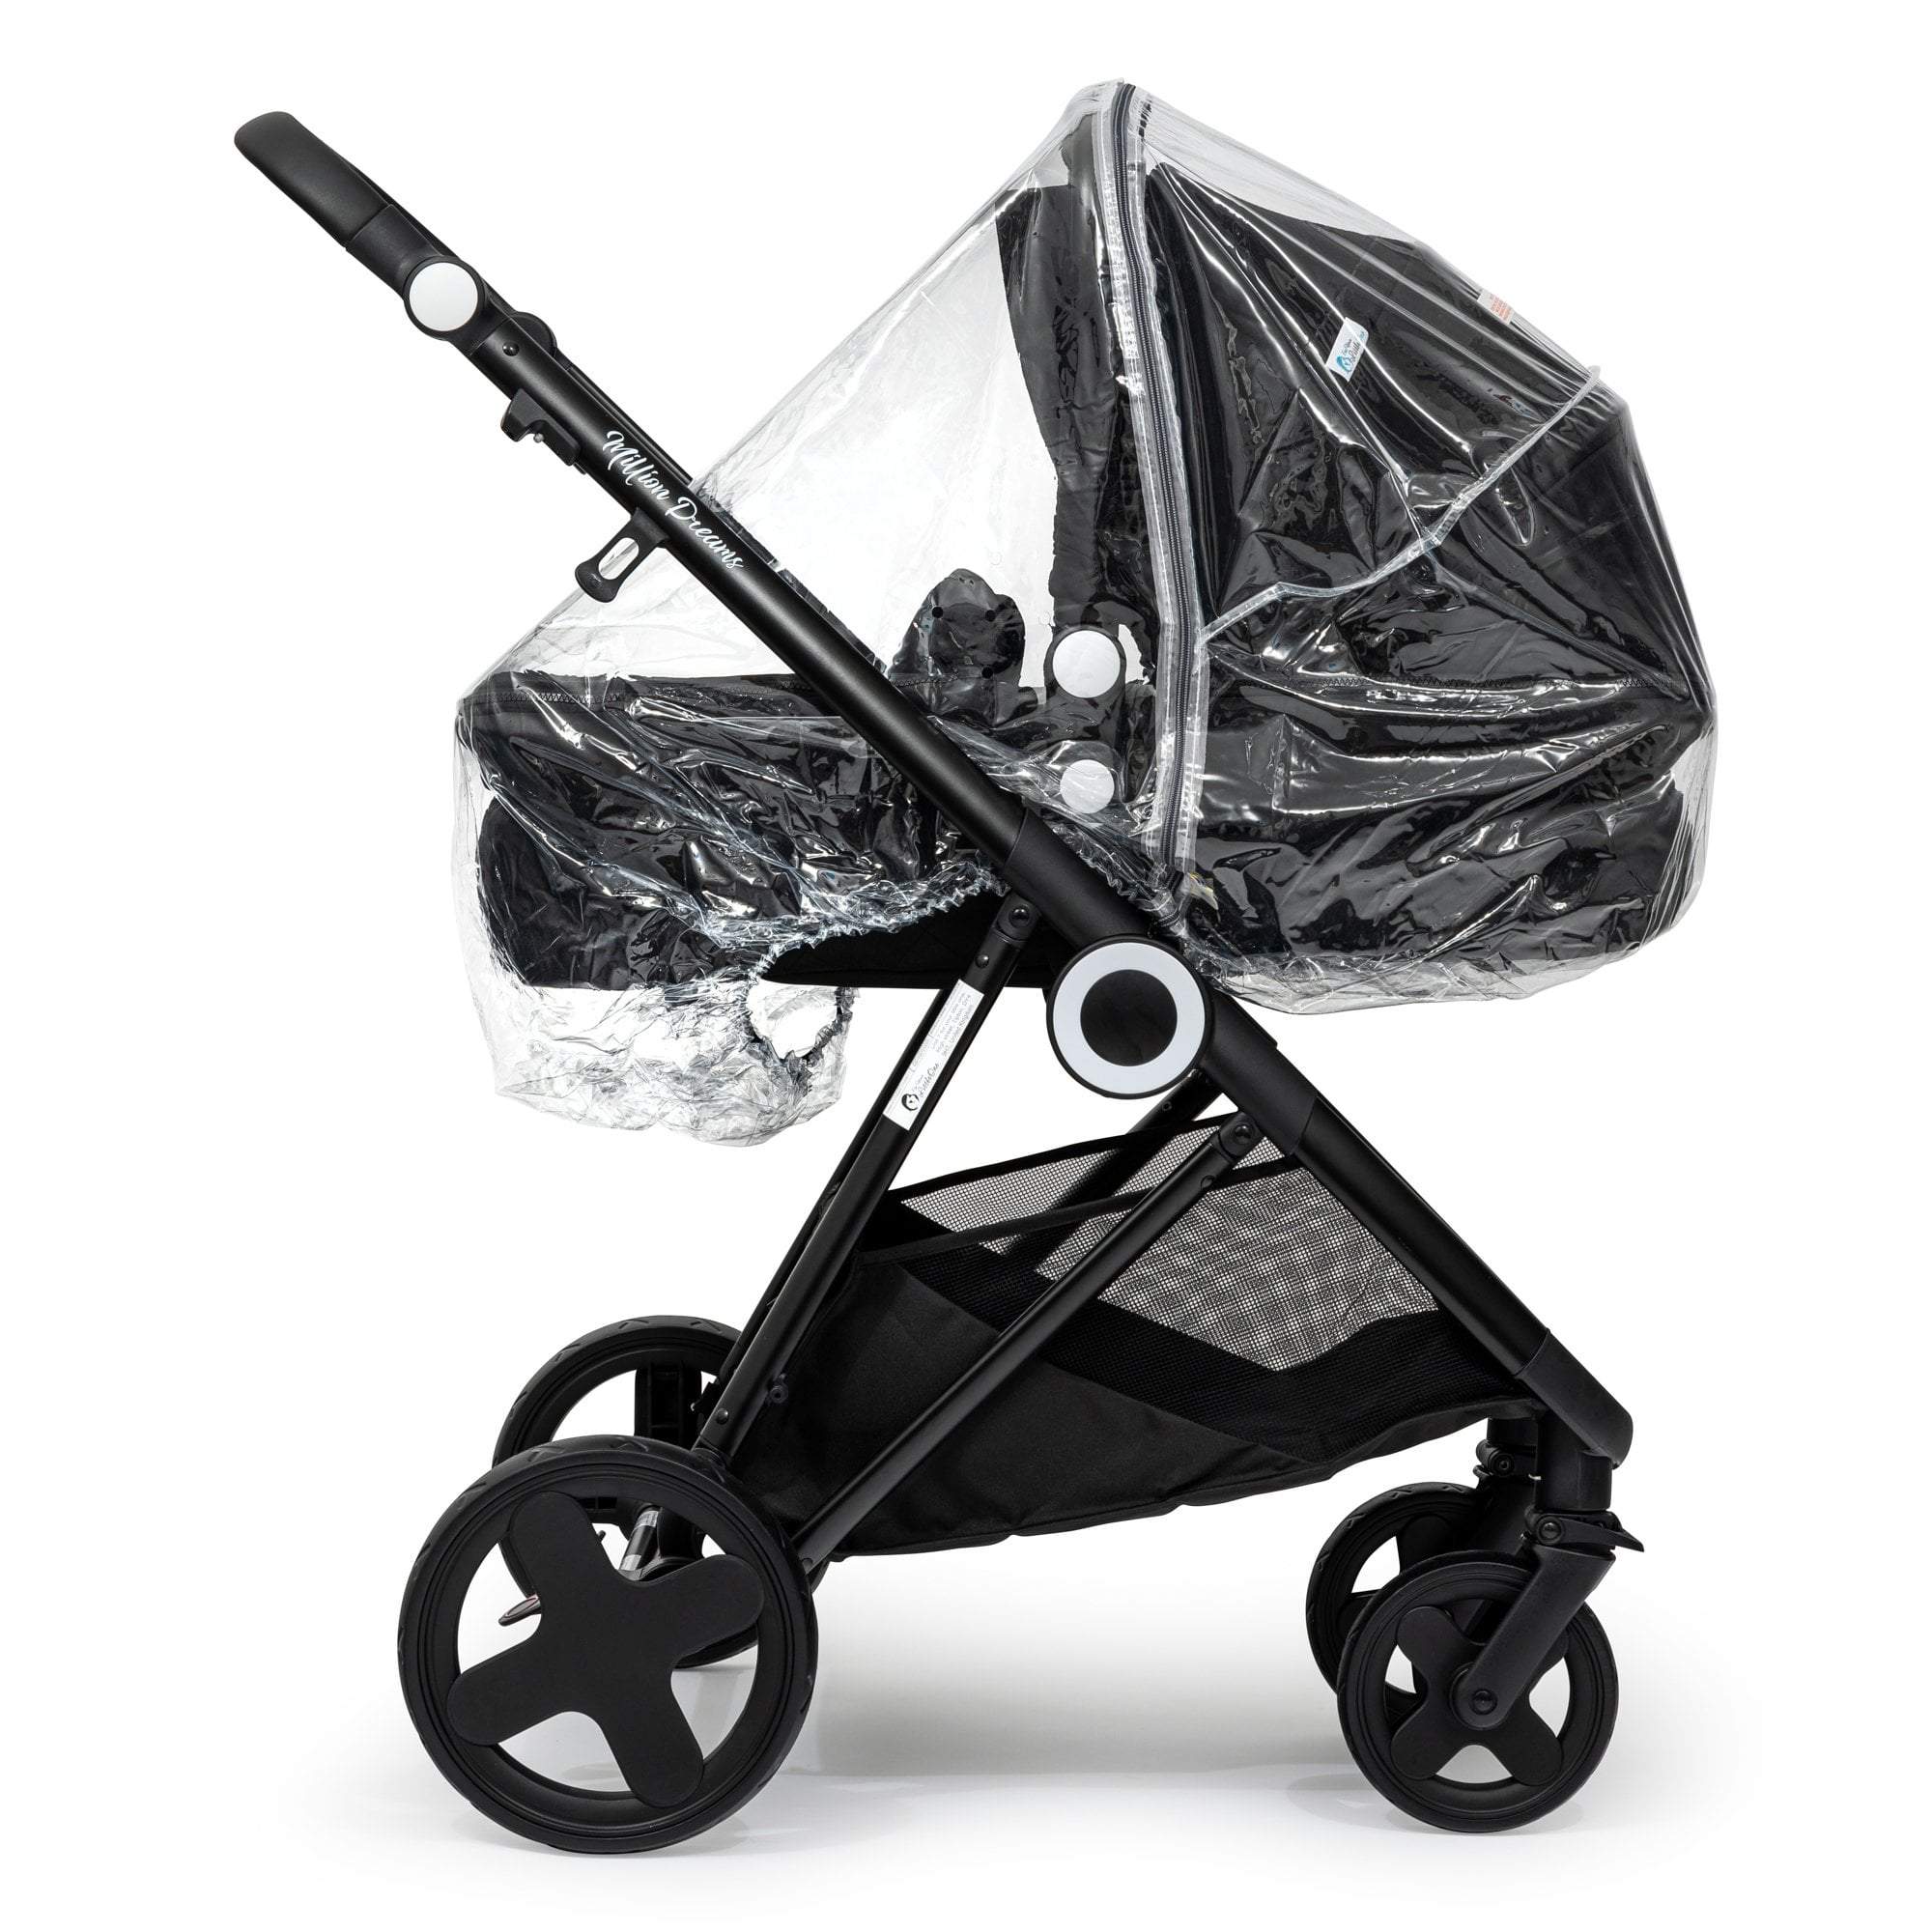 Carrycot Raincover Compatible With Cosatto - Fits All Models - For Your Little One